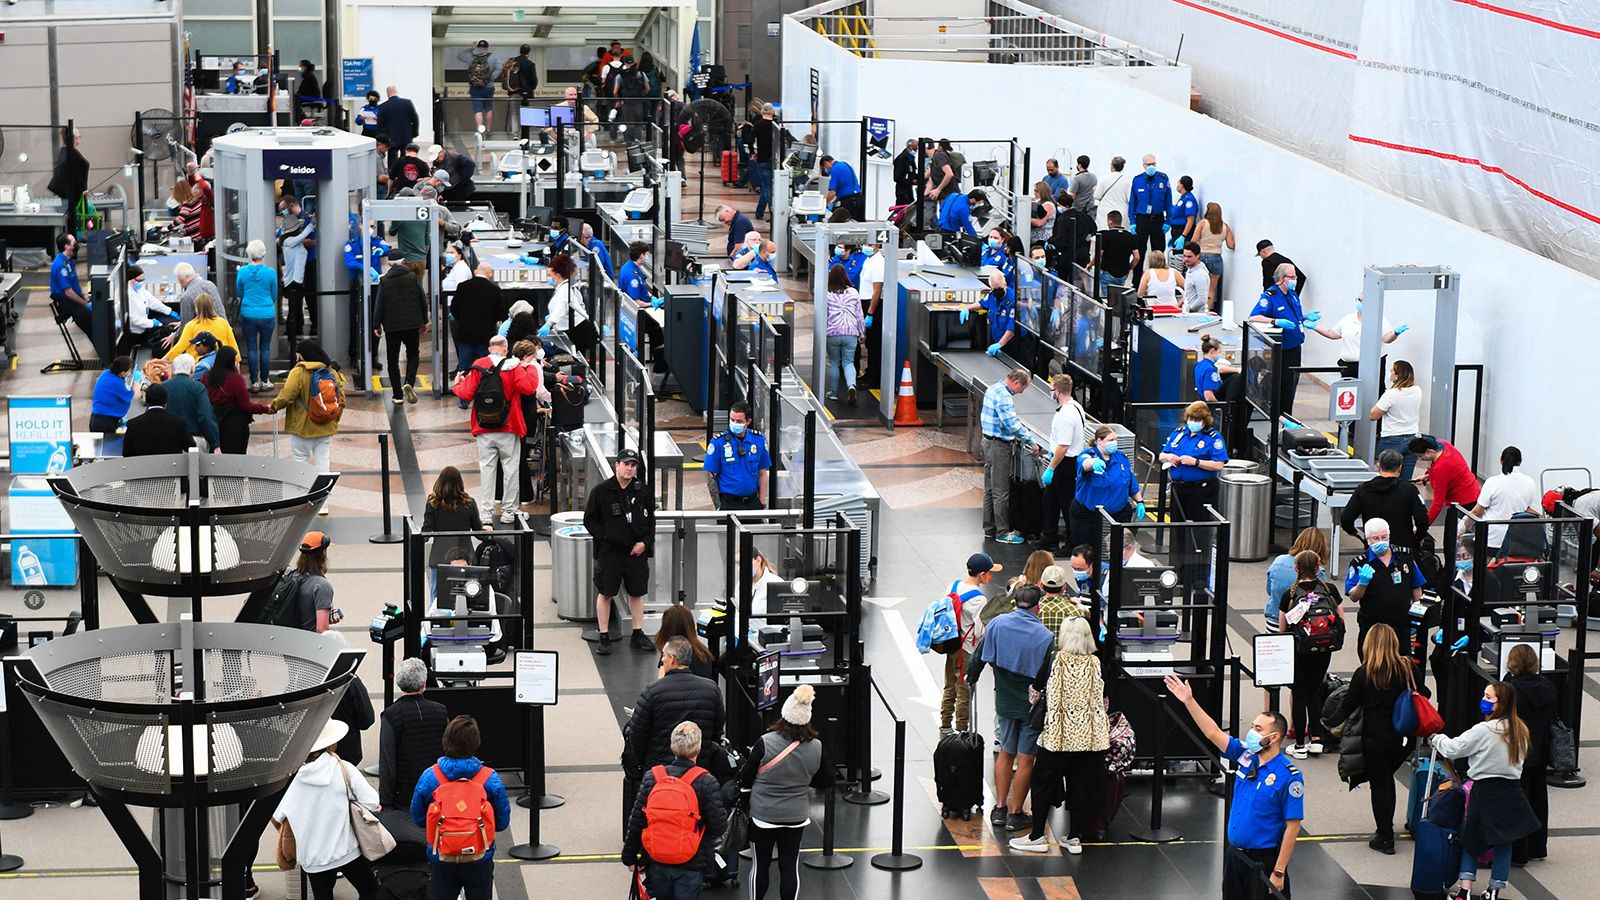 Countdown on: Mass. residents will soon need REAL ID to board an airplane -  Boston News, Weather, Sports